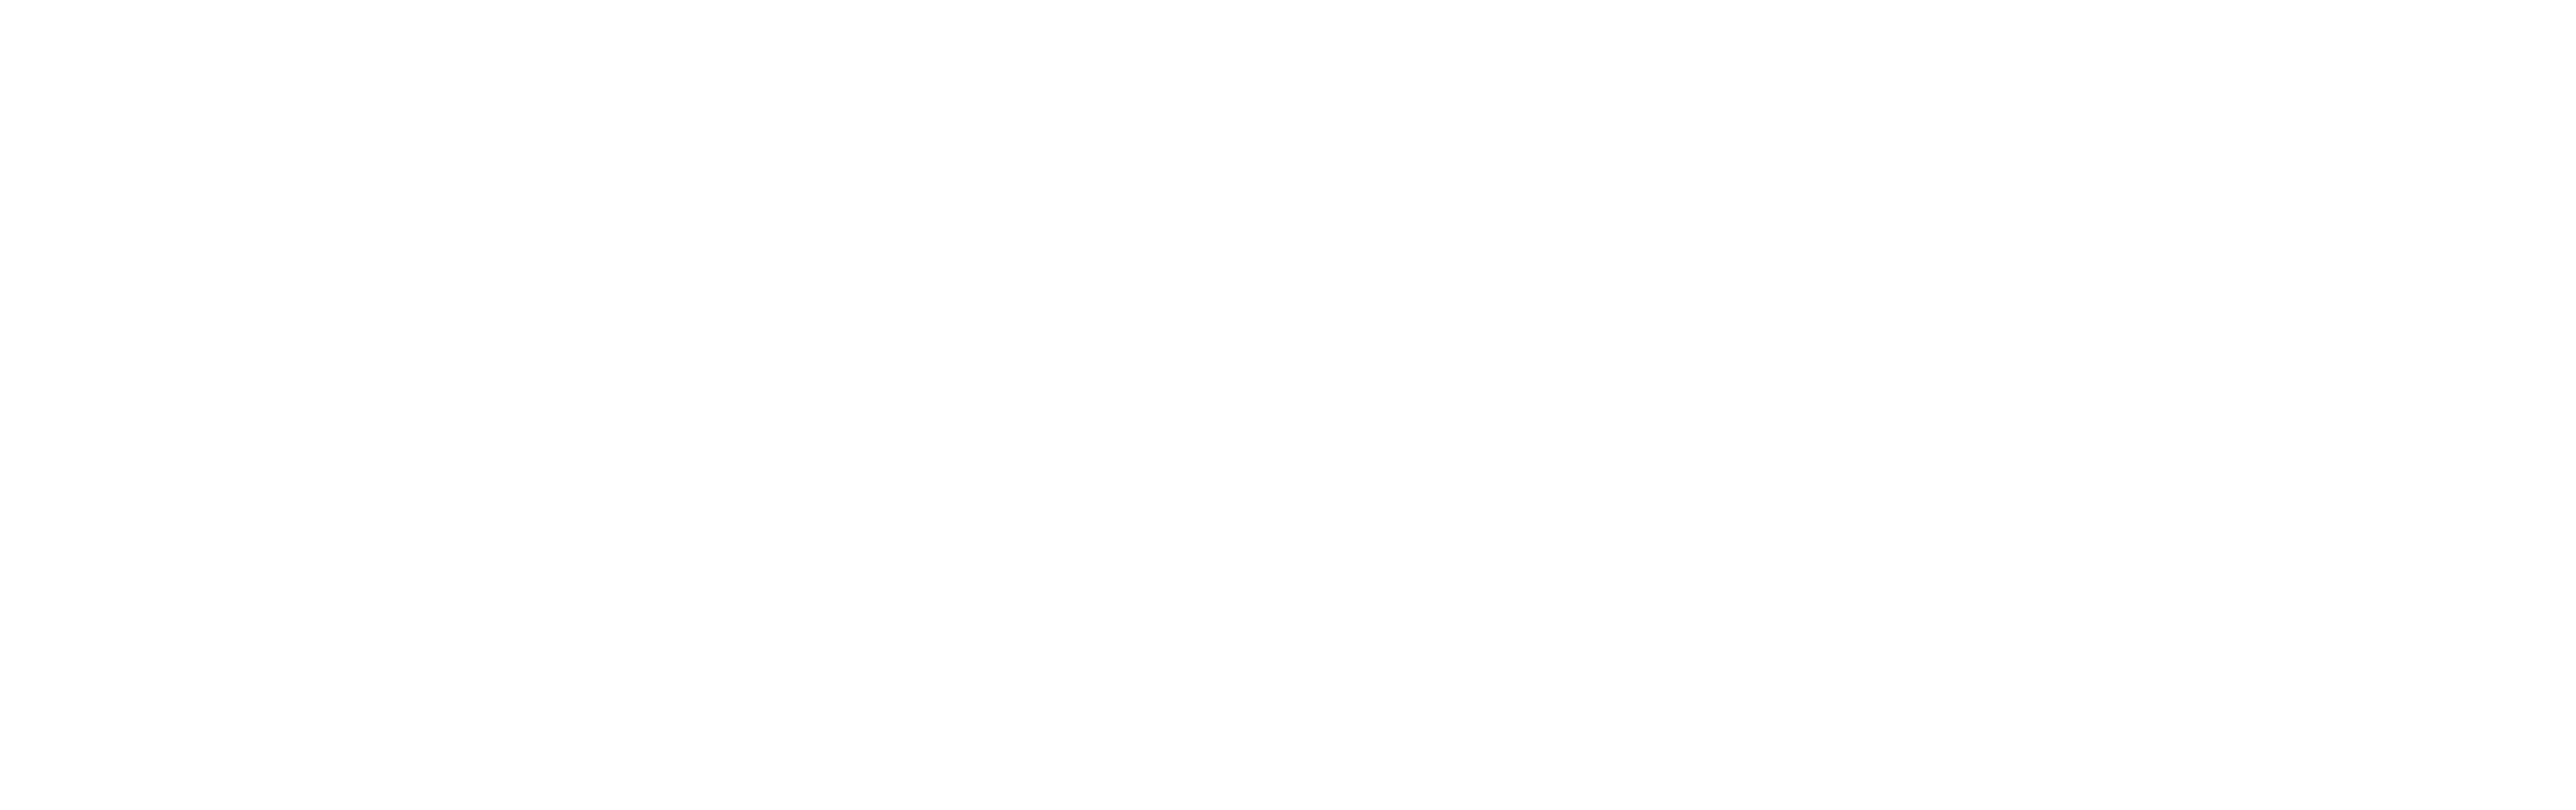 SQream_logo_without background-15 (3)